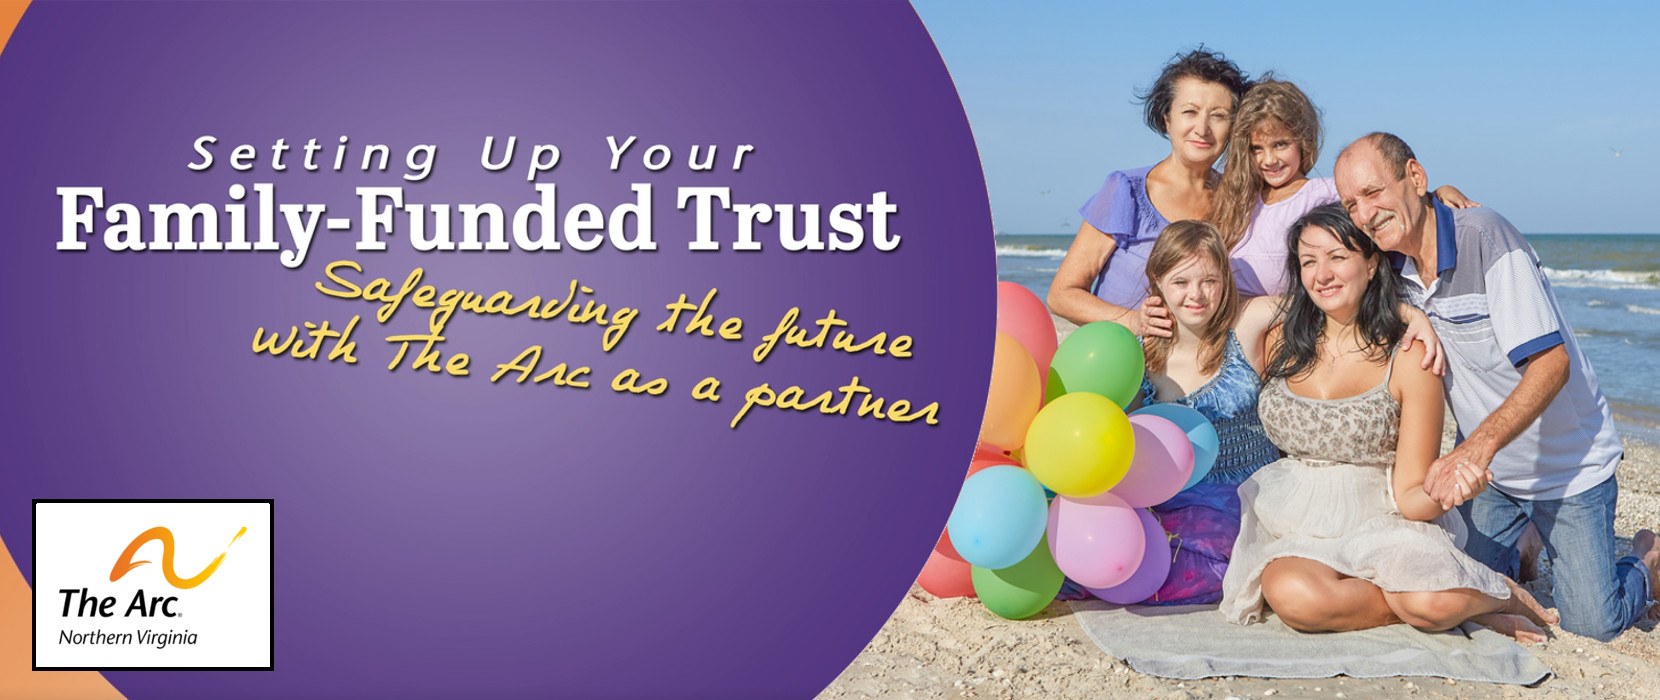 White text over a purple circle background reads Setting up your family funded trust safeguarding the future with The Arc as a partner. Next to the purple circle is a photo of a family at the beach, including a mom, two daughters, and grandma and grandpa. The family are kneeling on a towel. Next to them is a bouquet of balloons.